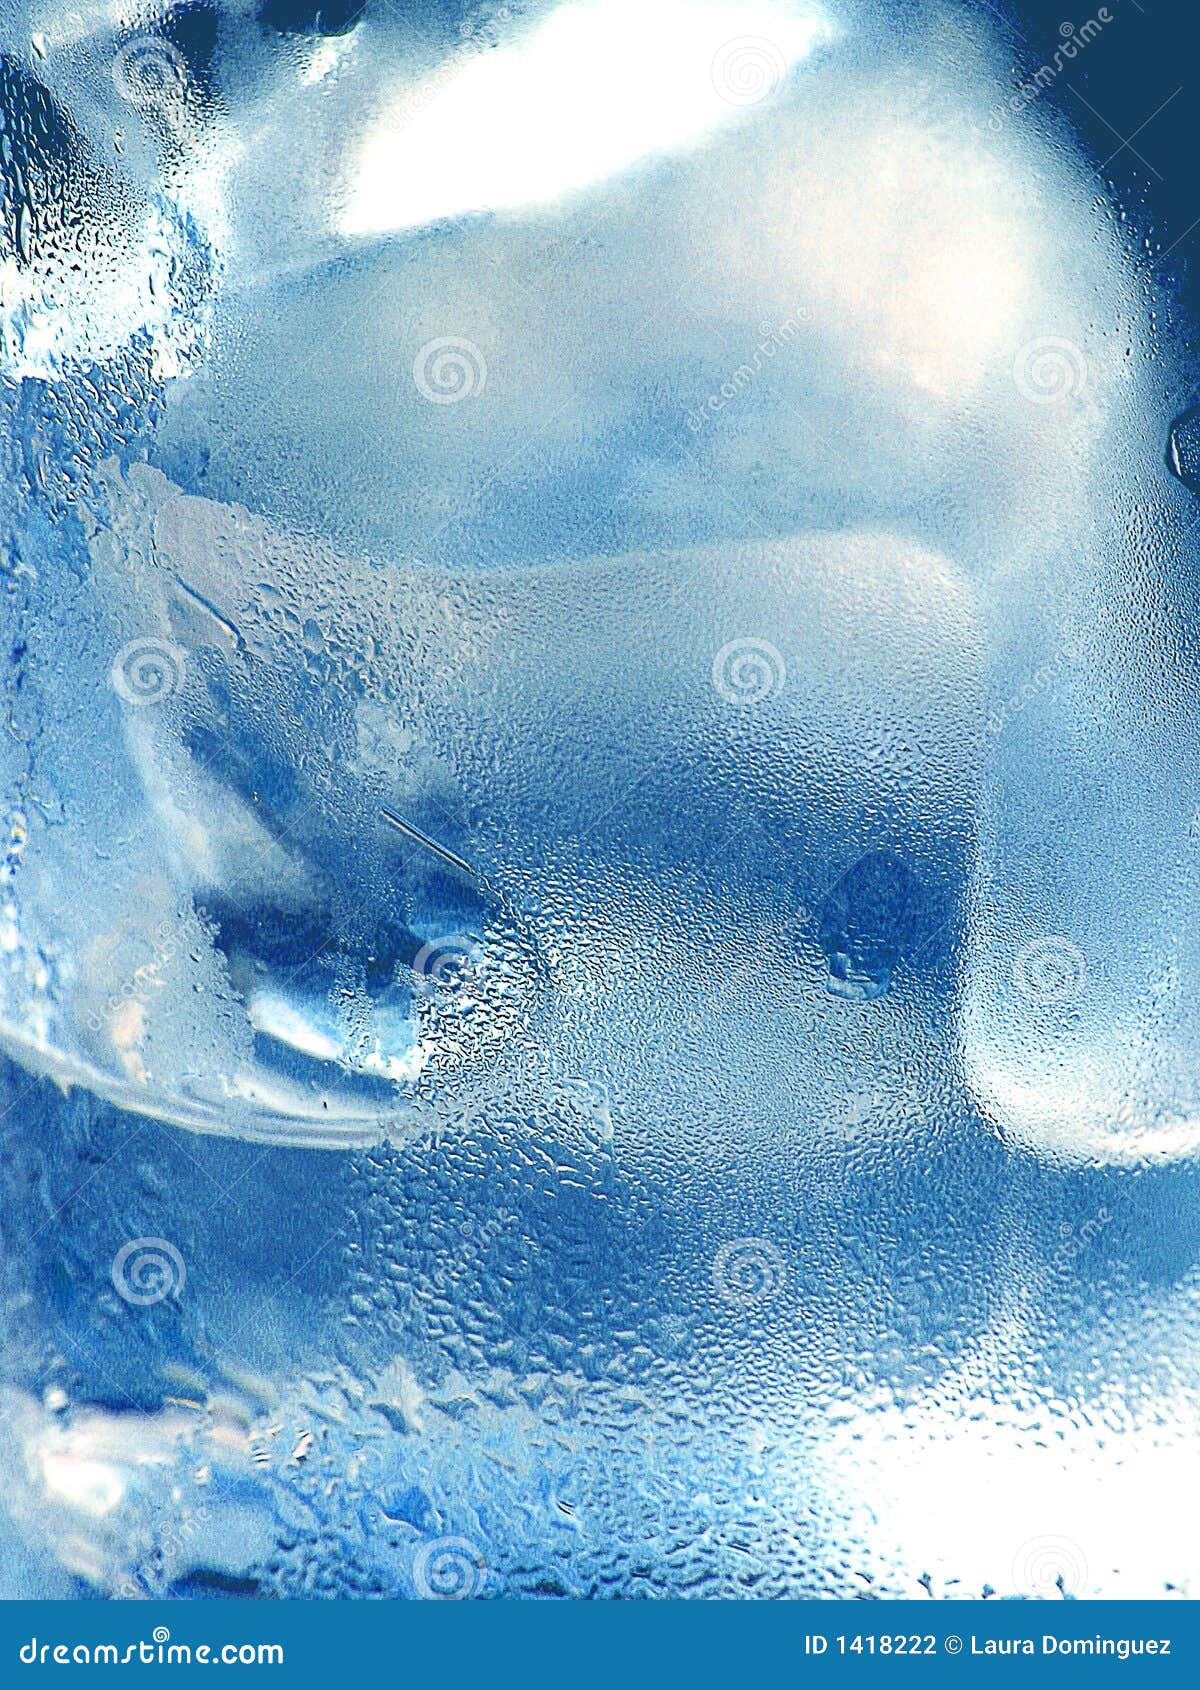 Blue ice background stock photo. Image of curve, blur - 1418222